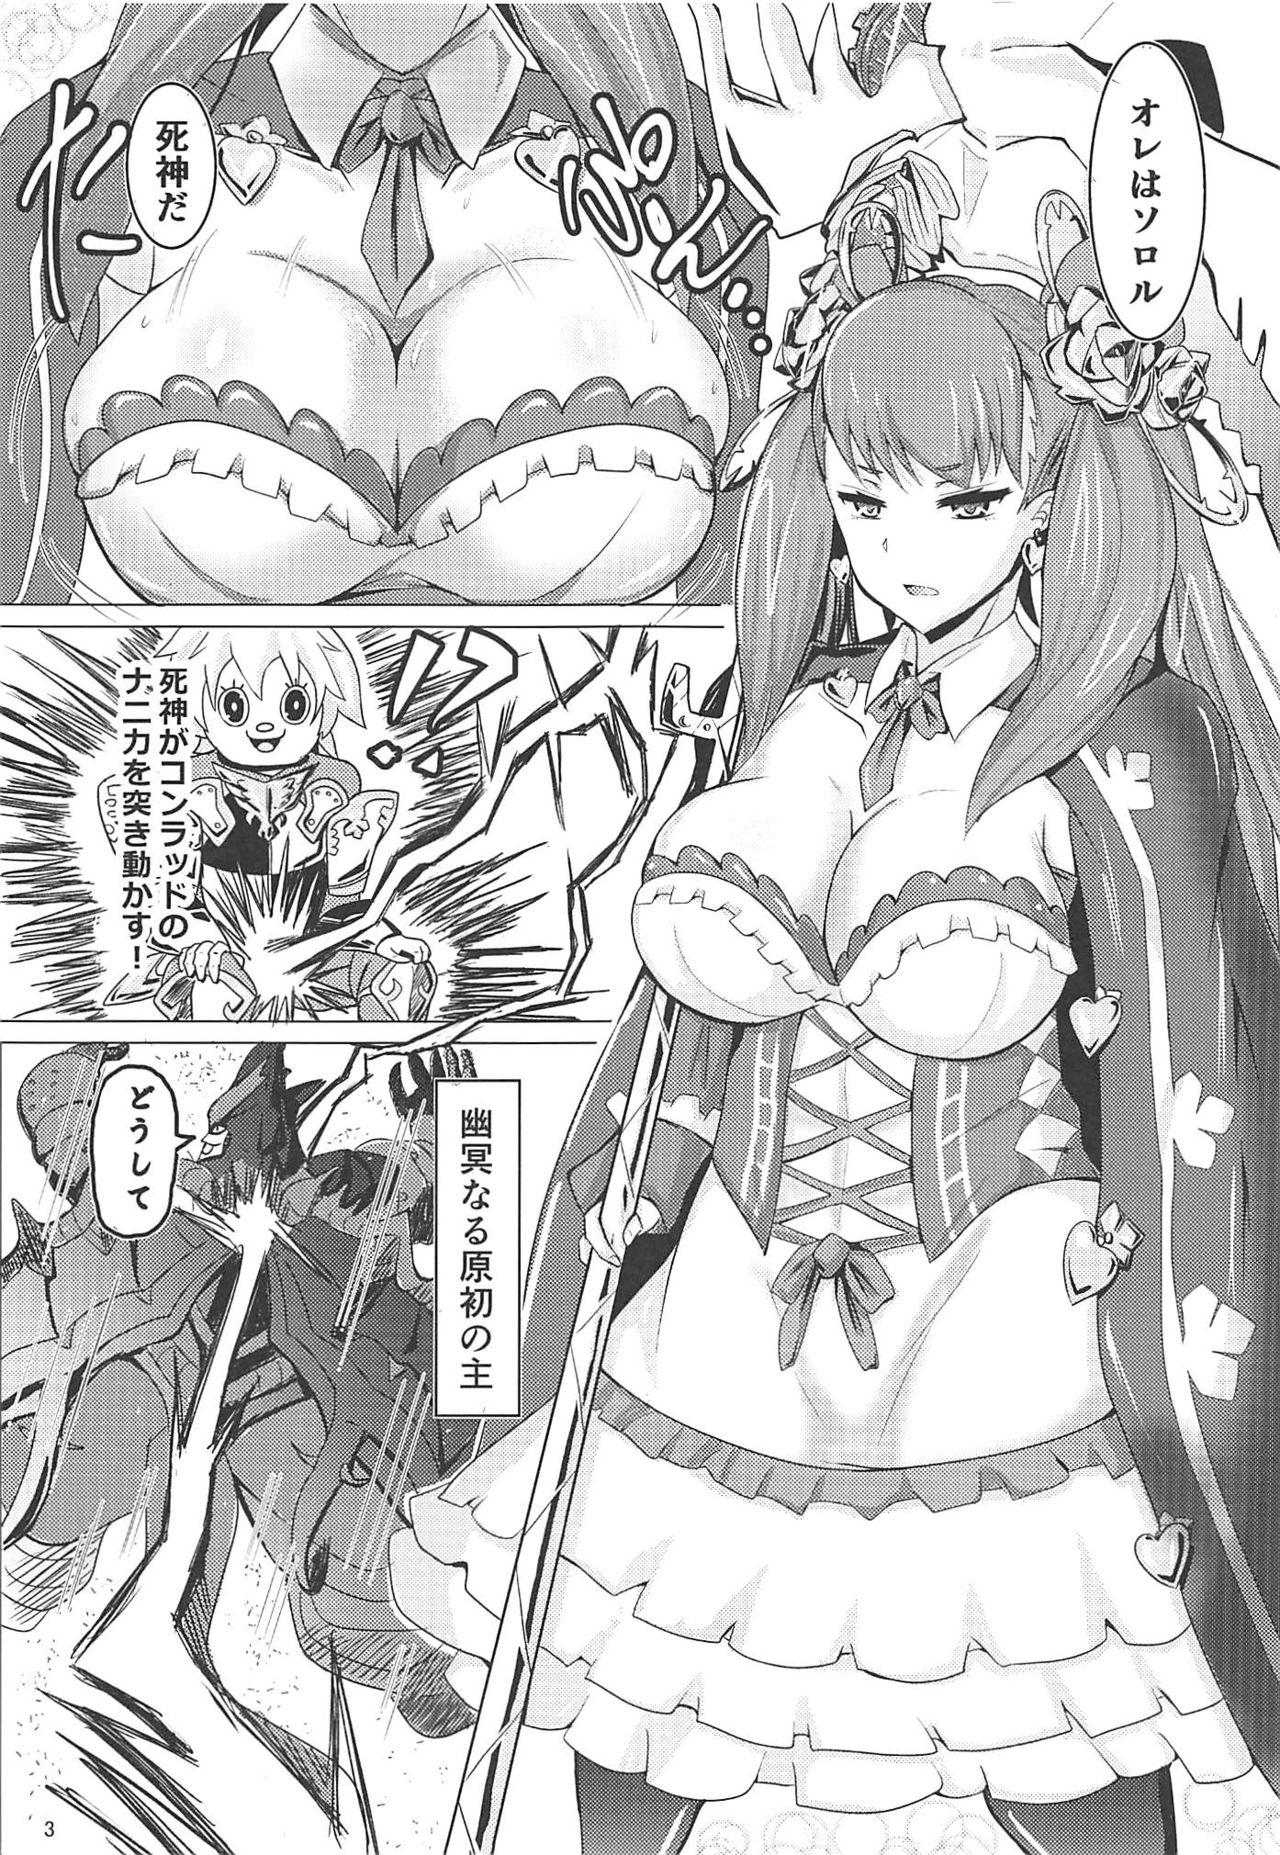 Bigblackcock Death in General + C96 Omake Paper - Etrian odyssey Double Blowjob - Page 2